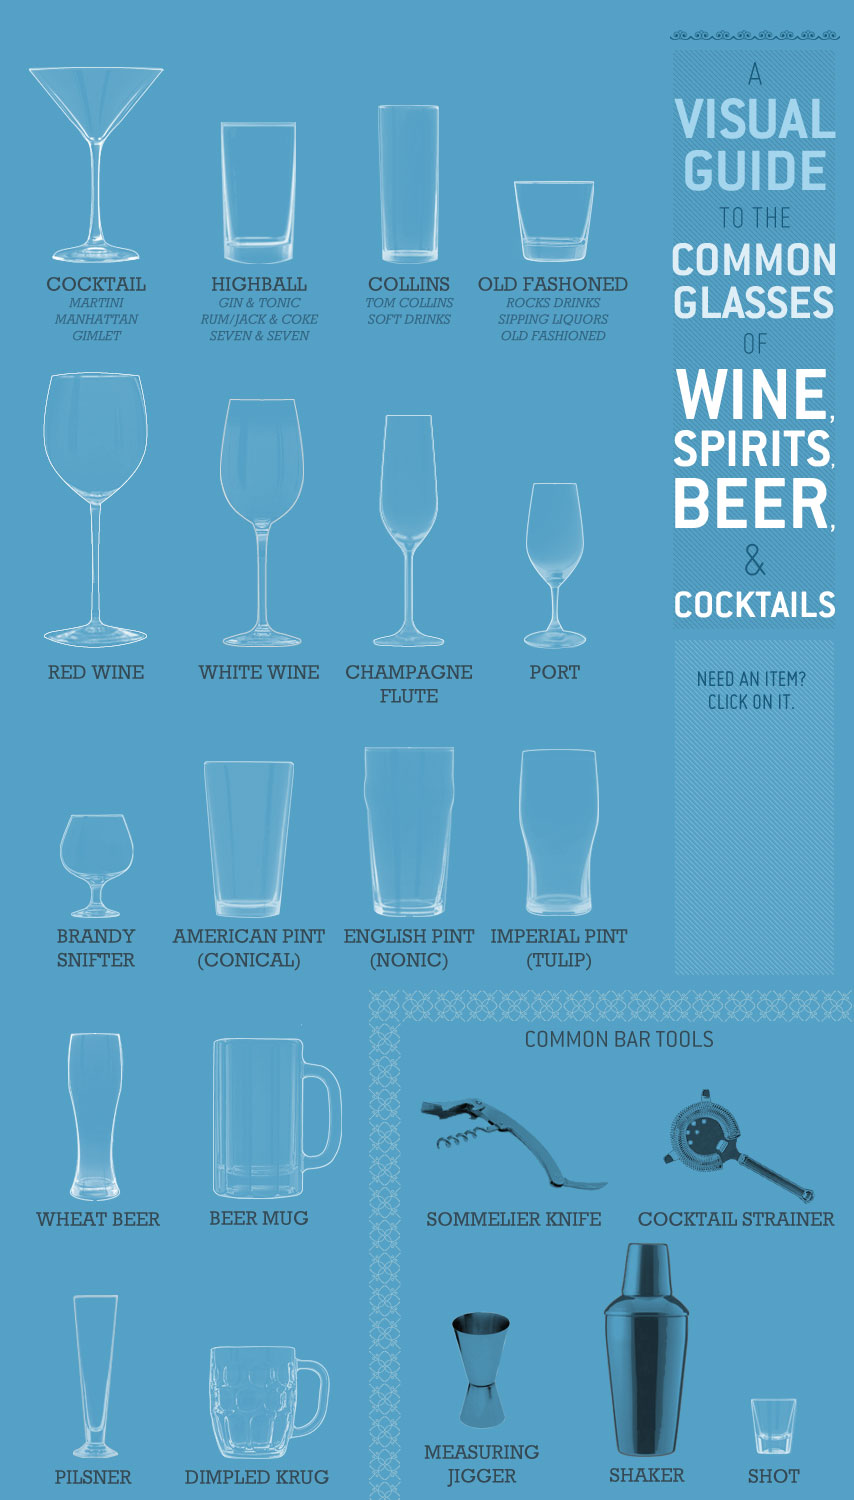 Visual Guide to common glasses for wine, spirits, beer, and cocktails infographic